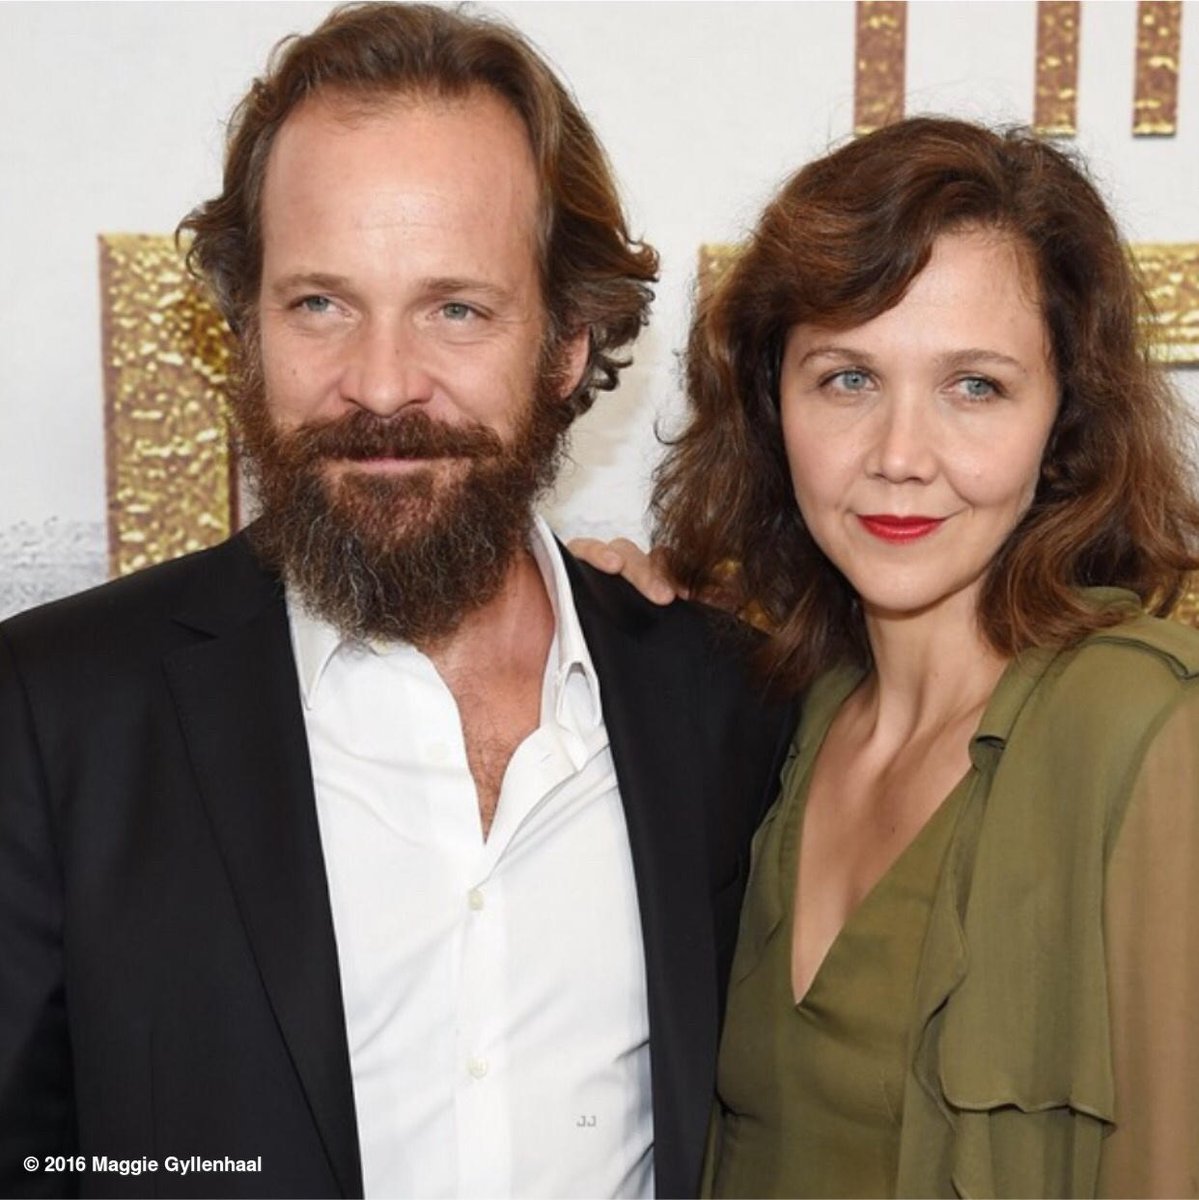 Me and my man @petersarsgaard at the #Magnifiscent7 premiere. He makes a good bad guy https://t.co/EXTFowxXNa